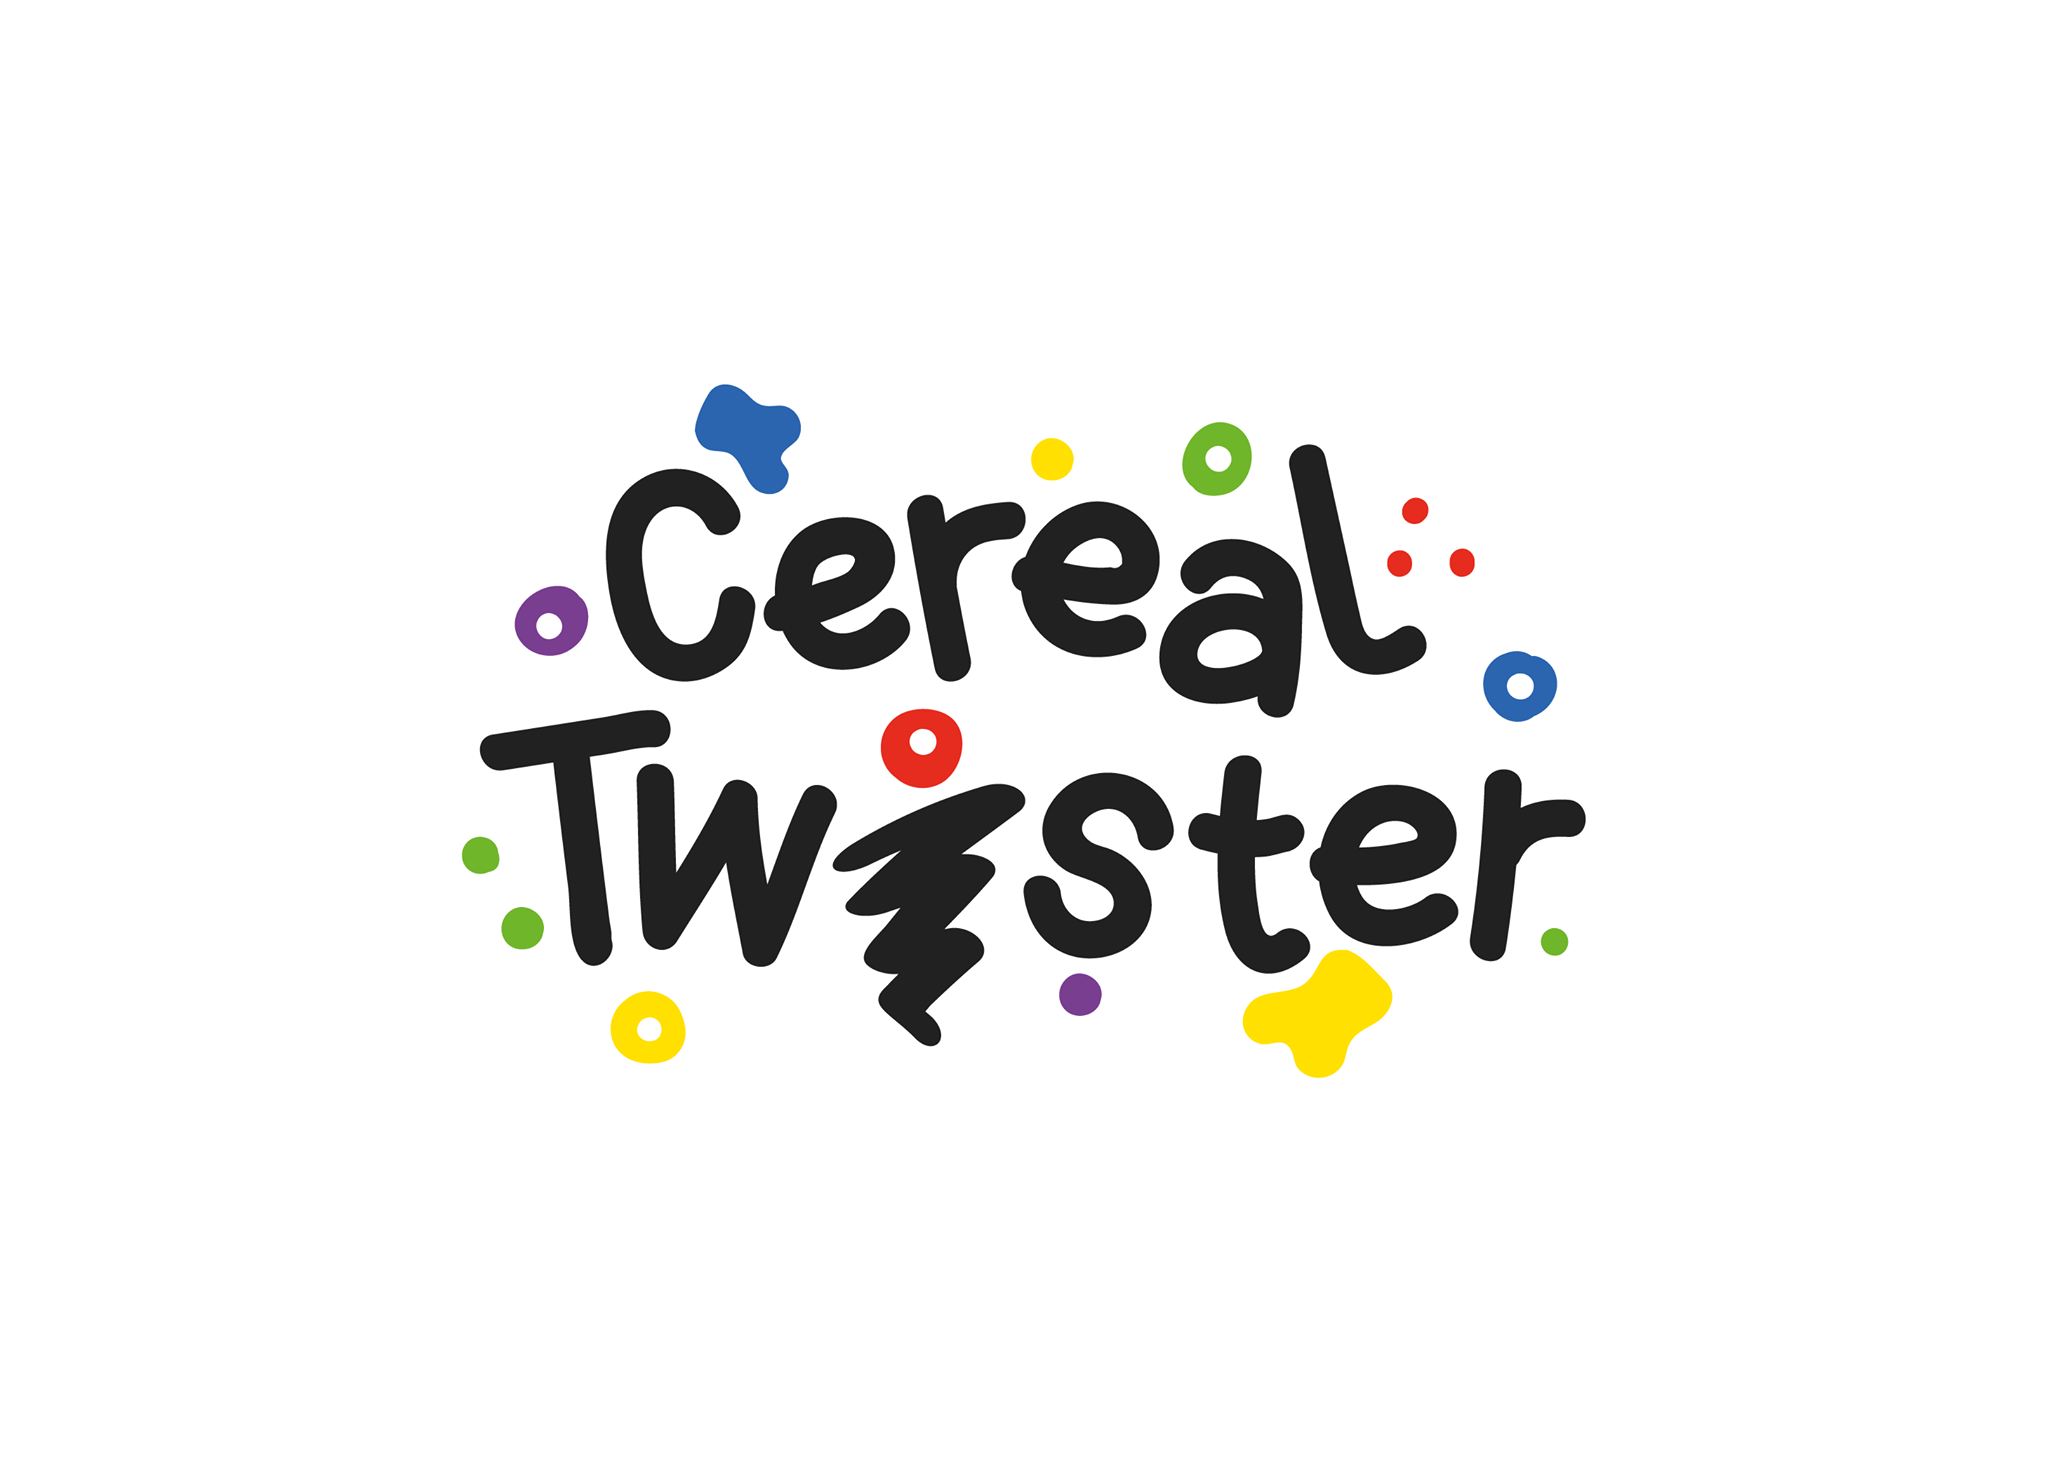 Cereal Twister and Aspect